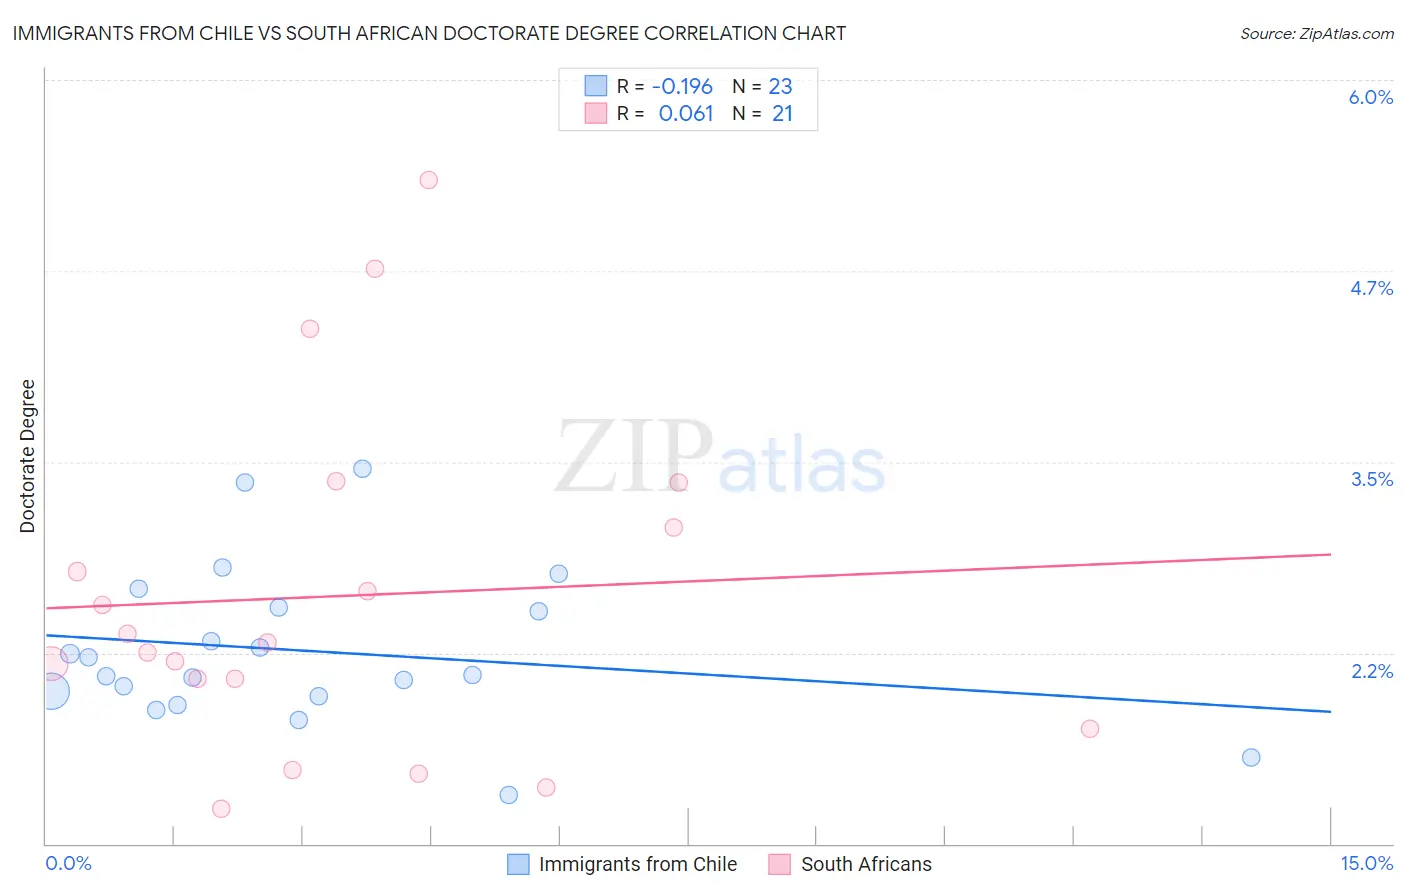 Immigrants from Chile vs South African Doctorate Degree